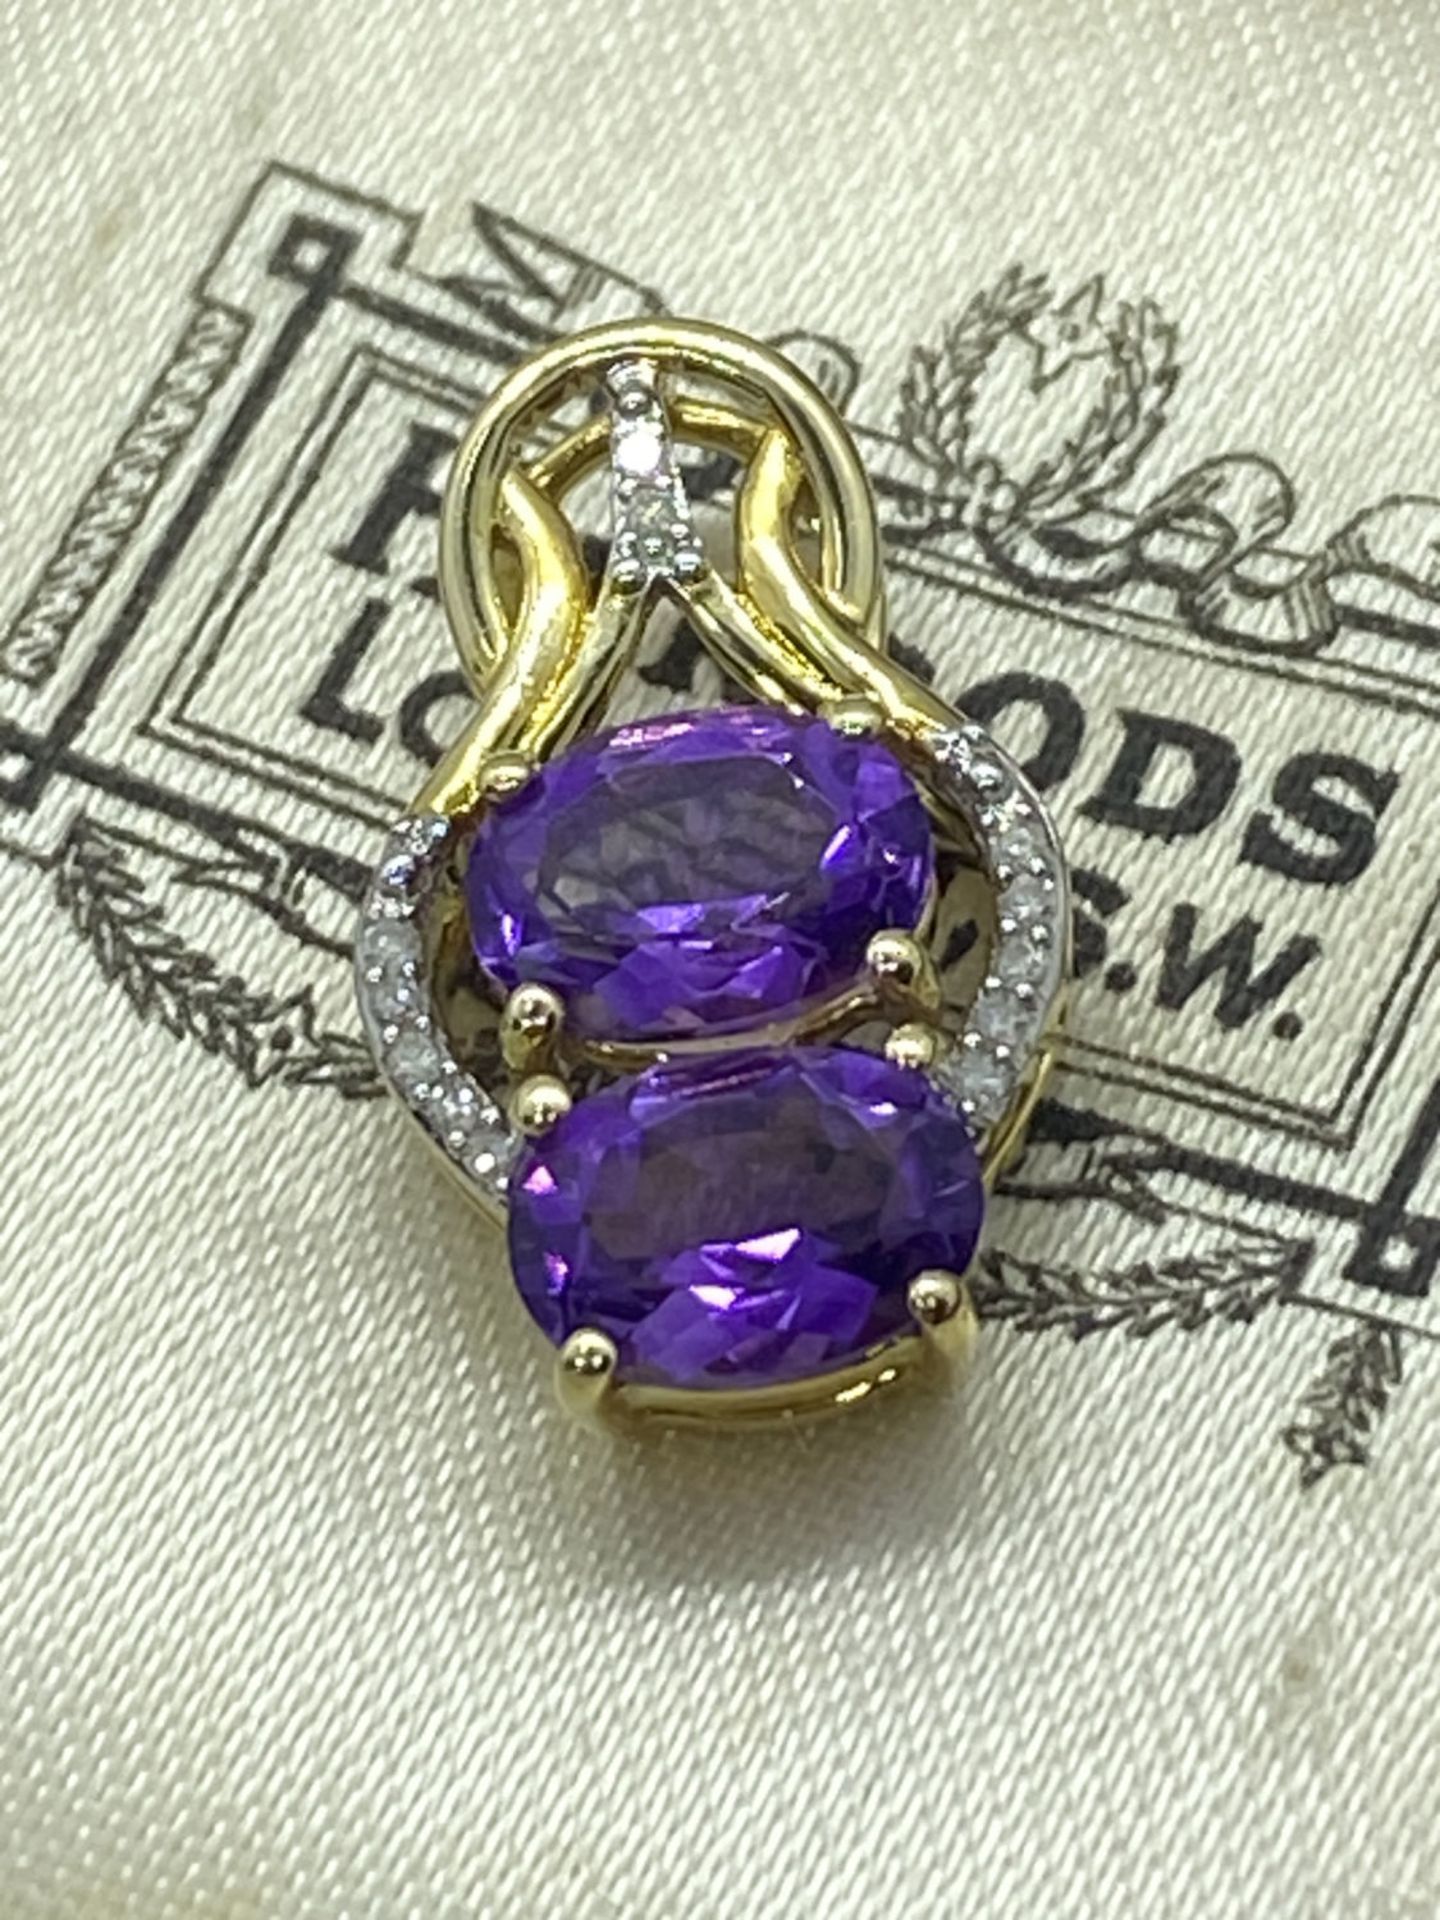 MOROCCAN AMETHYST 10ct YELLOW GOLD PENDANT APPROX. 20mm X 10mm